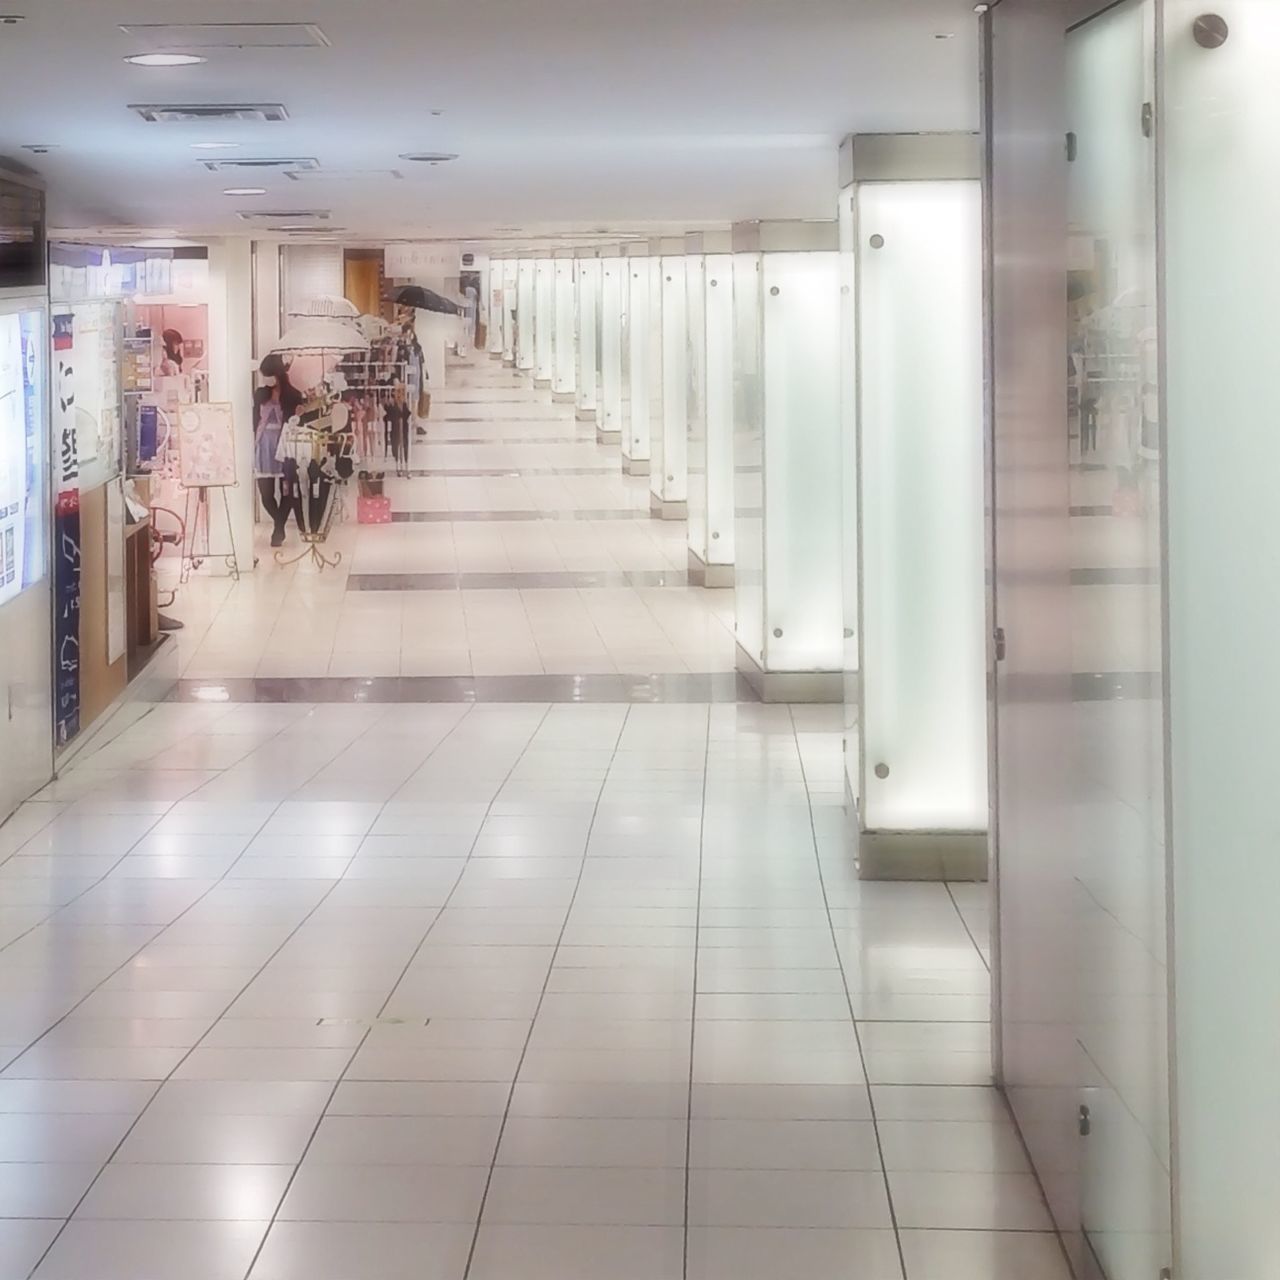 indoors, corridor, empty, ceiling, the way forward, flooring, tiled floor, architecture, absence, built structure, illuminated, modern, tile, subway, diminishing perspective, door, interior, in a row, reflection, wall - building feature